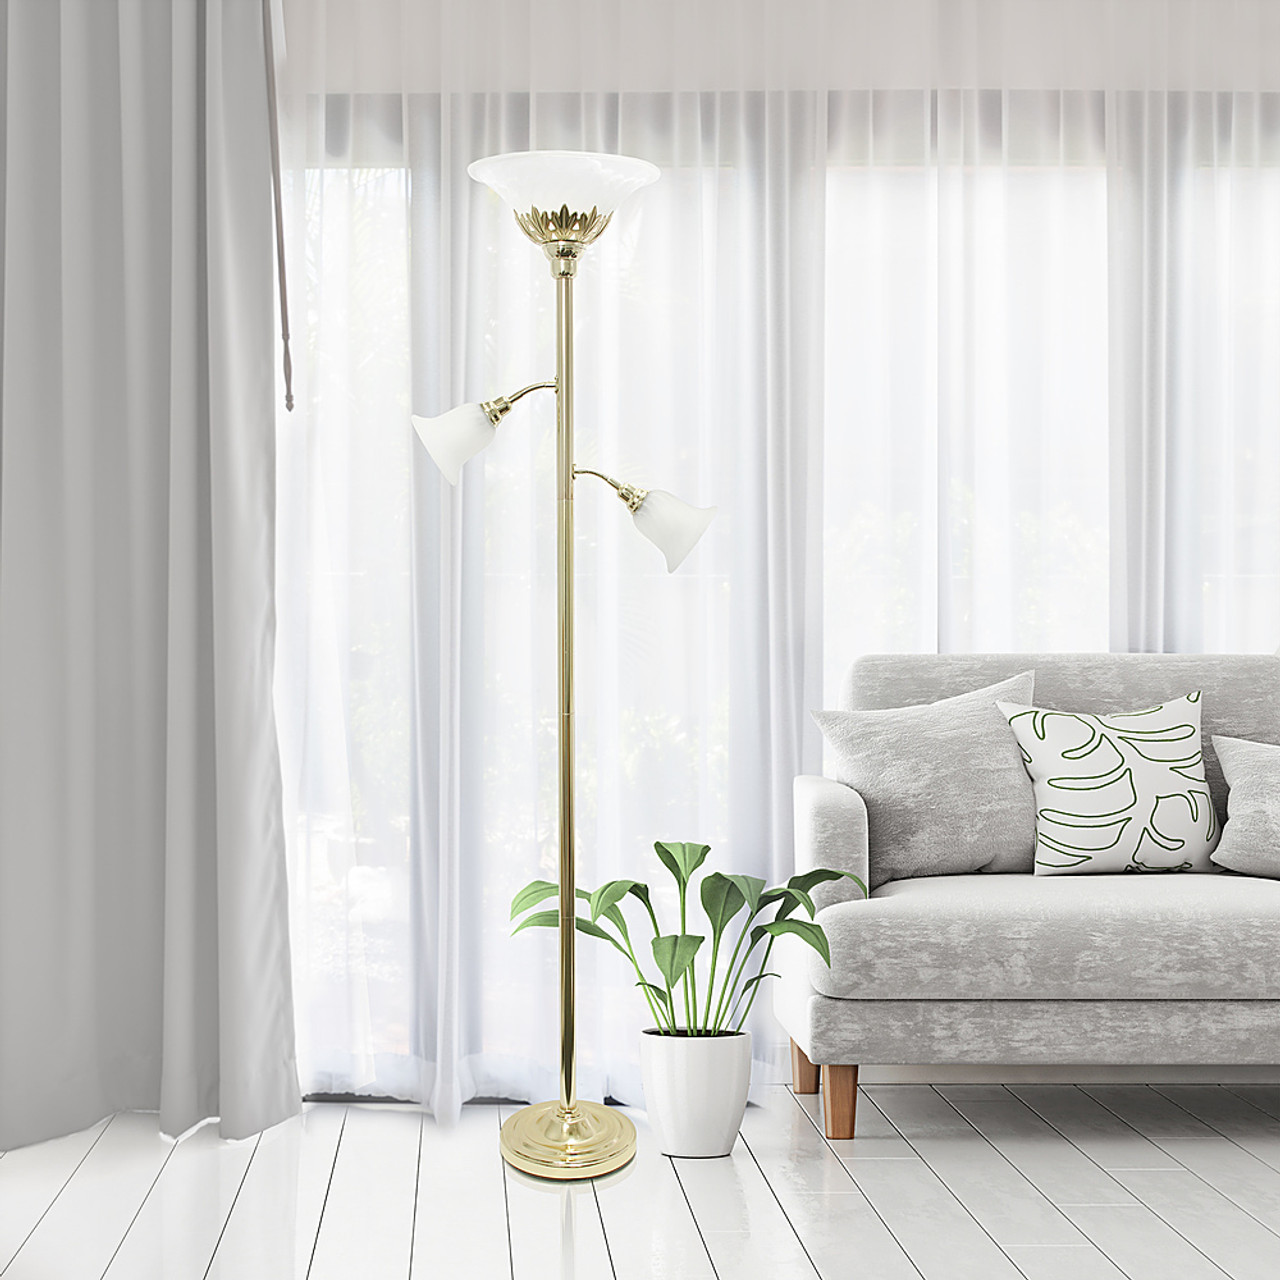 Elegant Designs 3 Light Floor Lamp with Scalloped Glass Shades, Gold